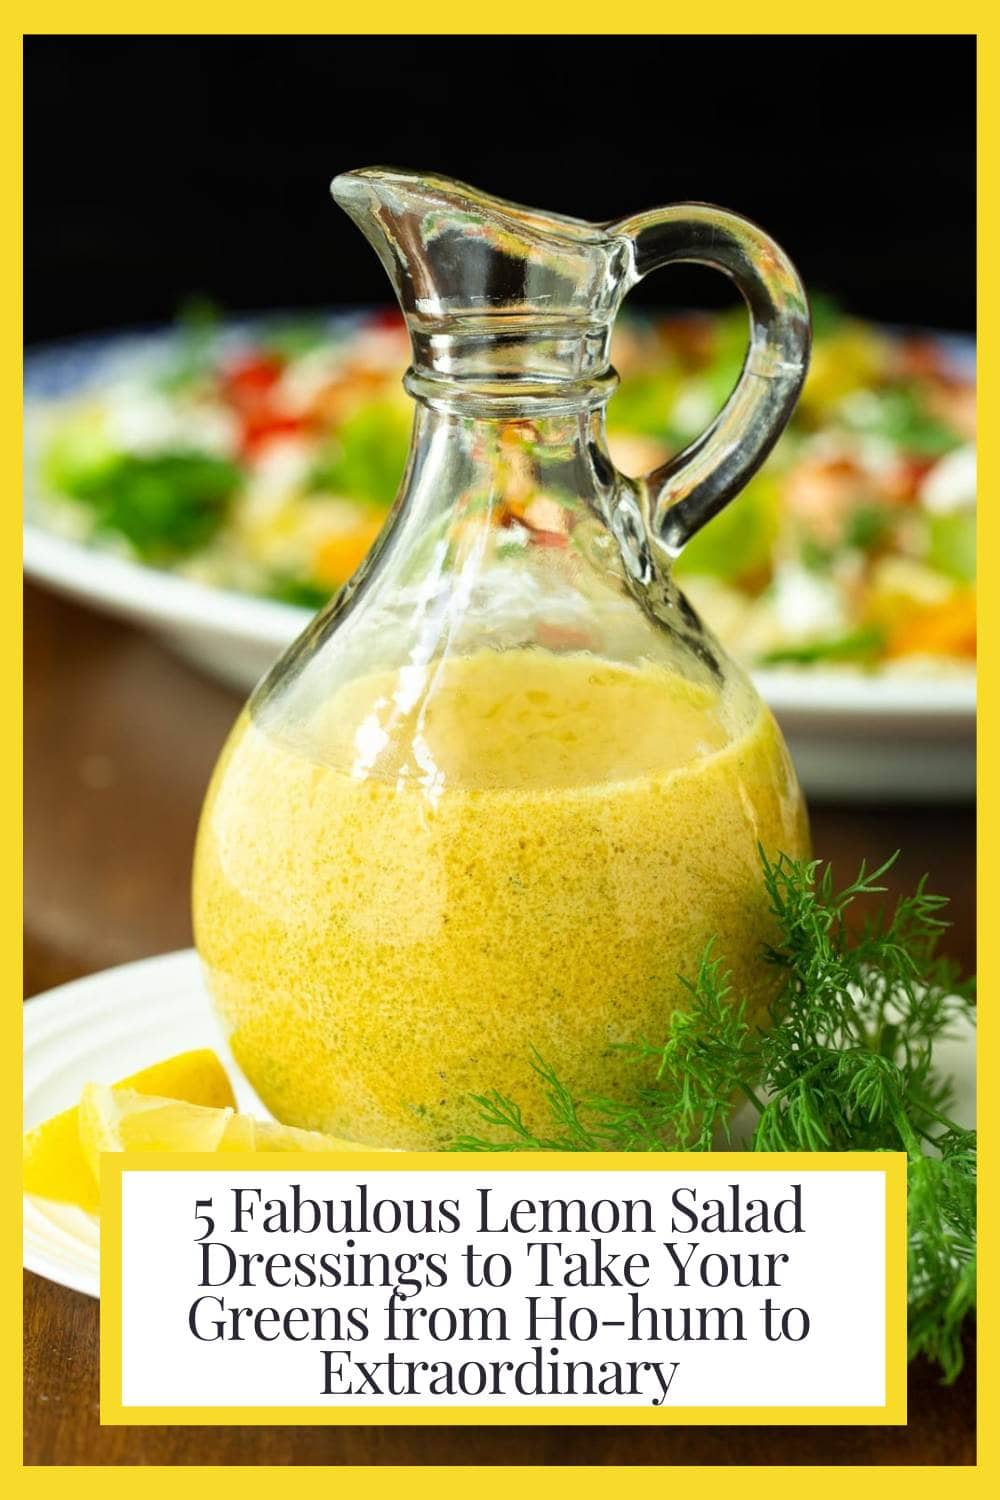 5 Fabulous Lemon Salad Dressings to Take Your Greens from Ho-hum to Extraordinary